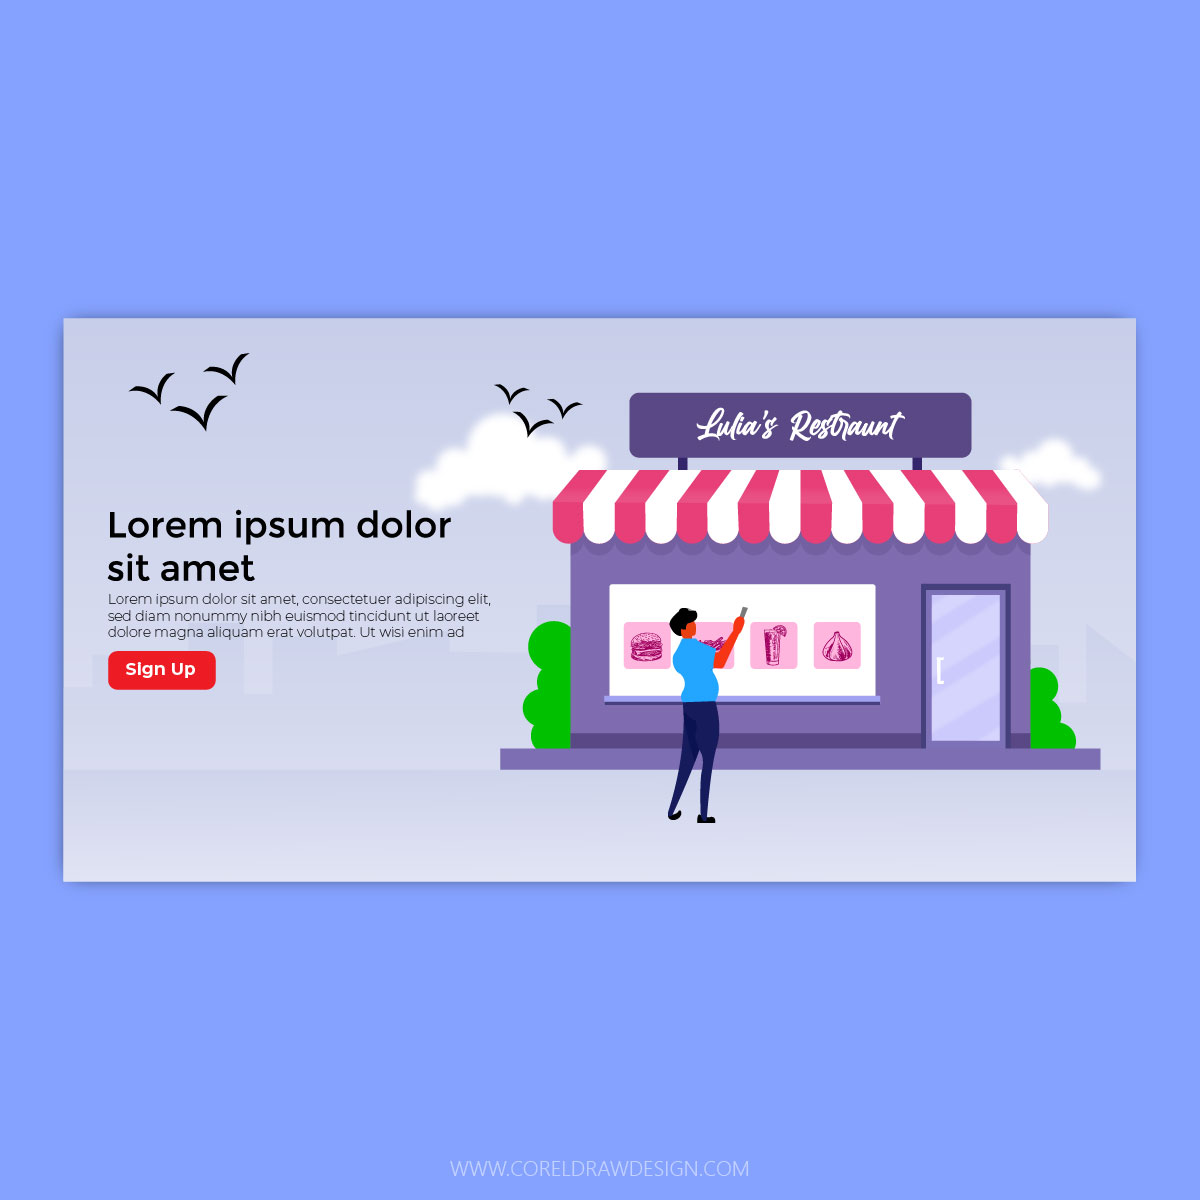 Restraunt Business Landing Page and Infographic Element